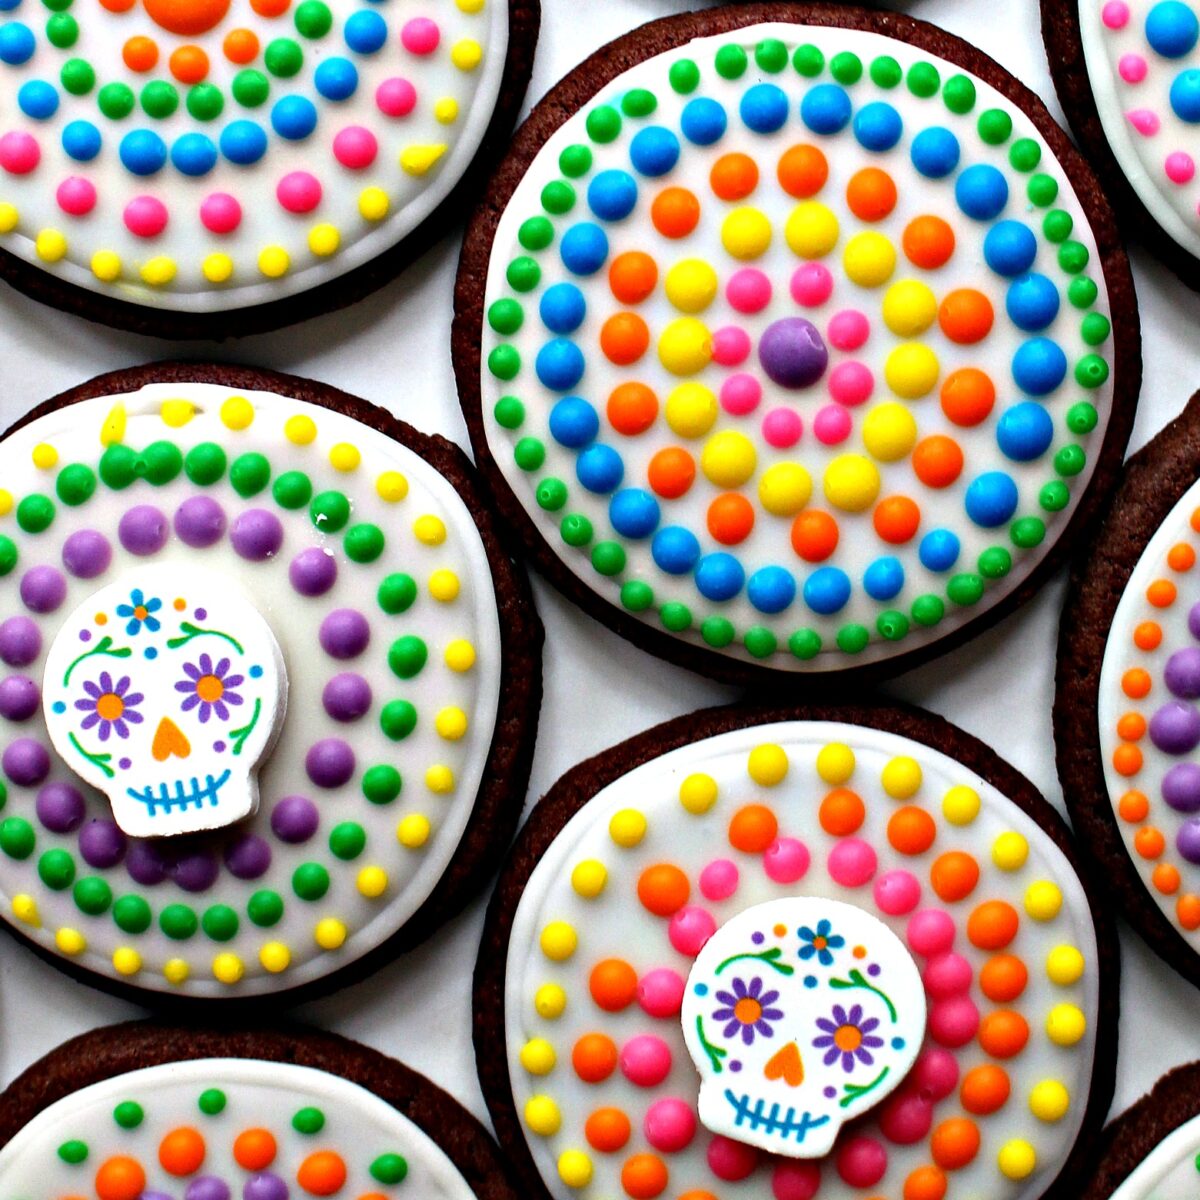 Day of the Dead cookies closeup showing circles of colorful dot decorations.